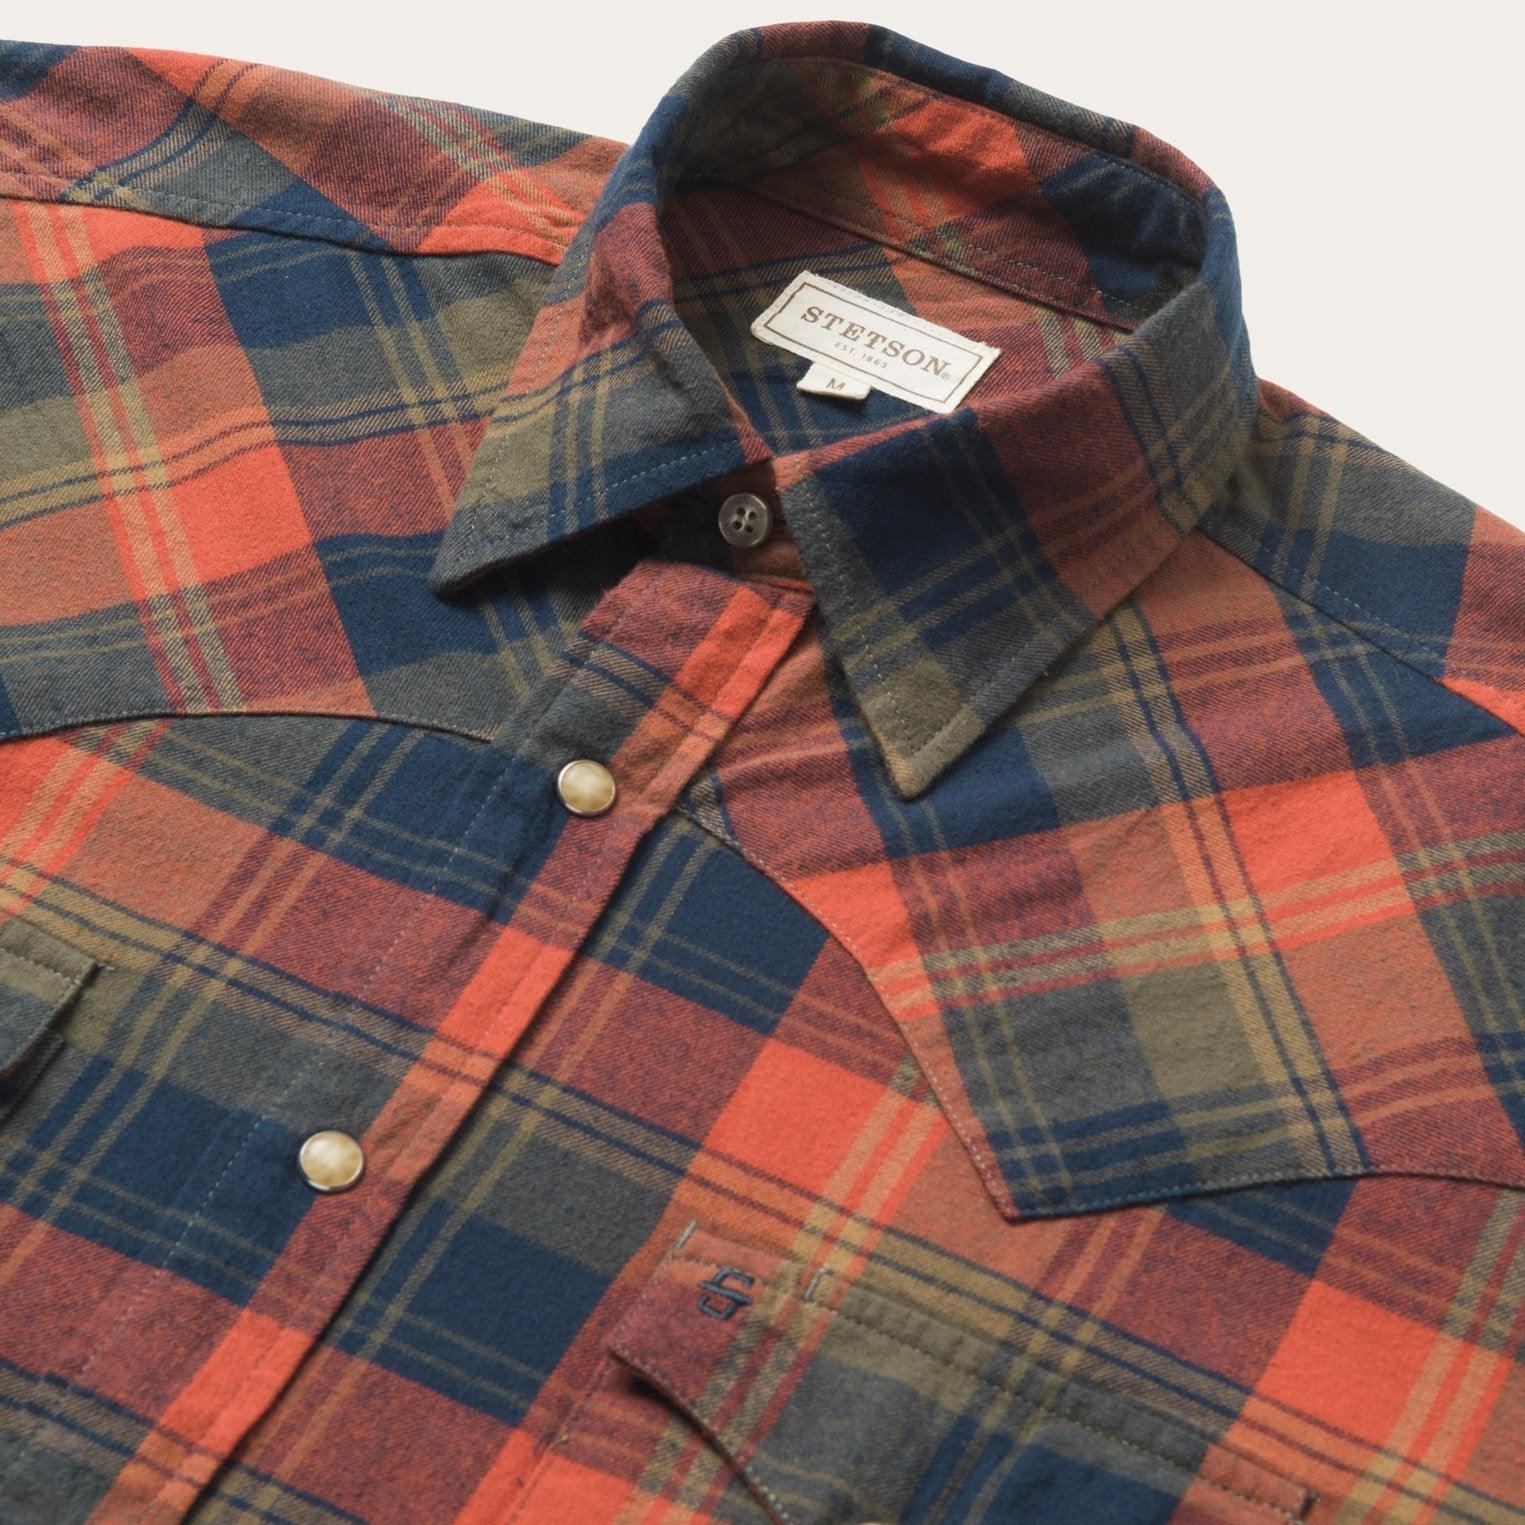 Stetson Classic Flannel Western Shirt in Orange and Blue Plaid - Flyclothing LLC